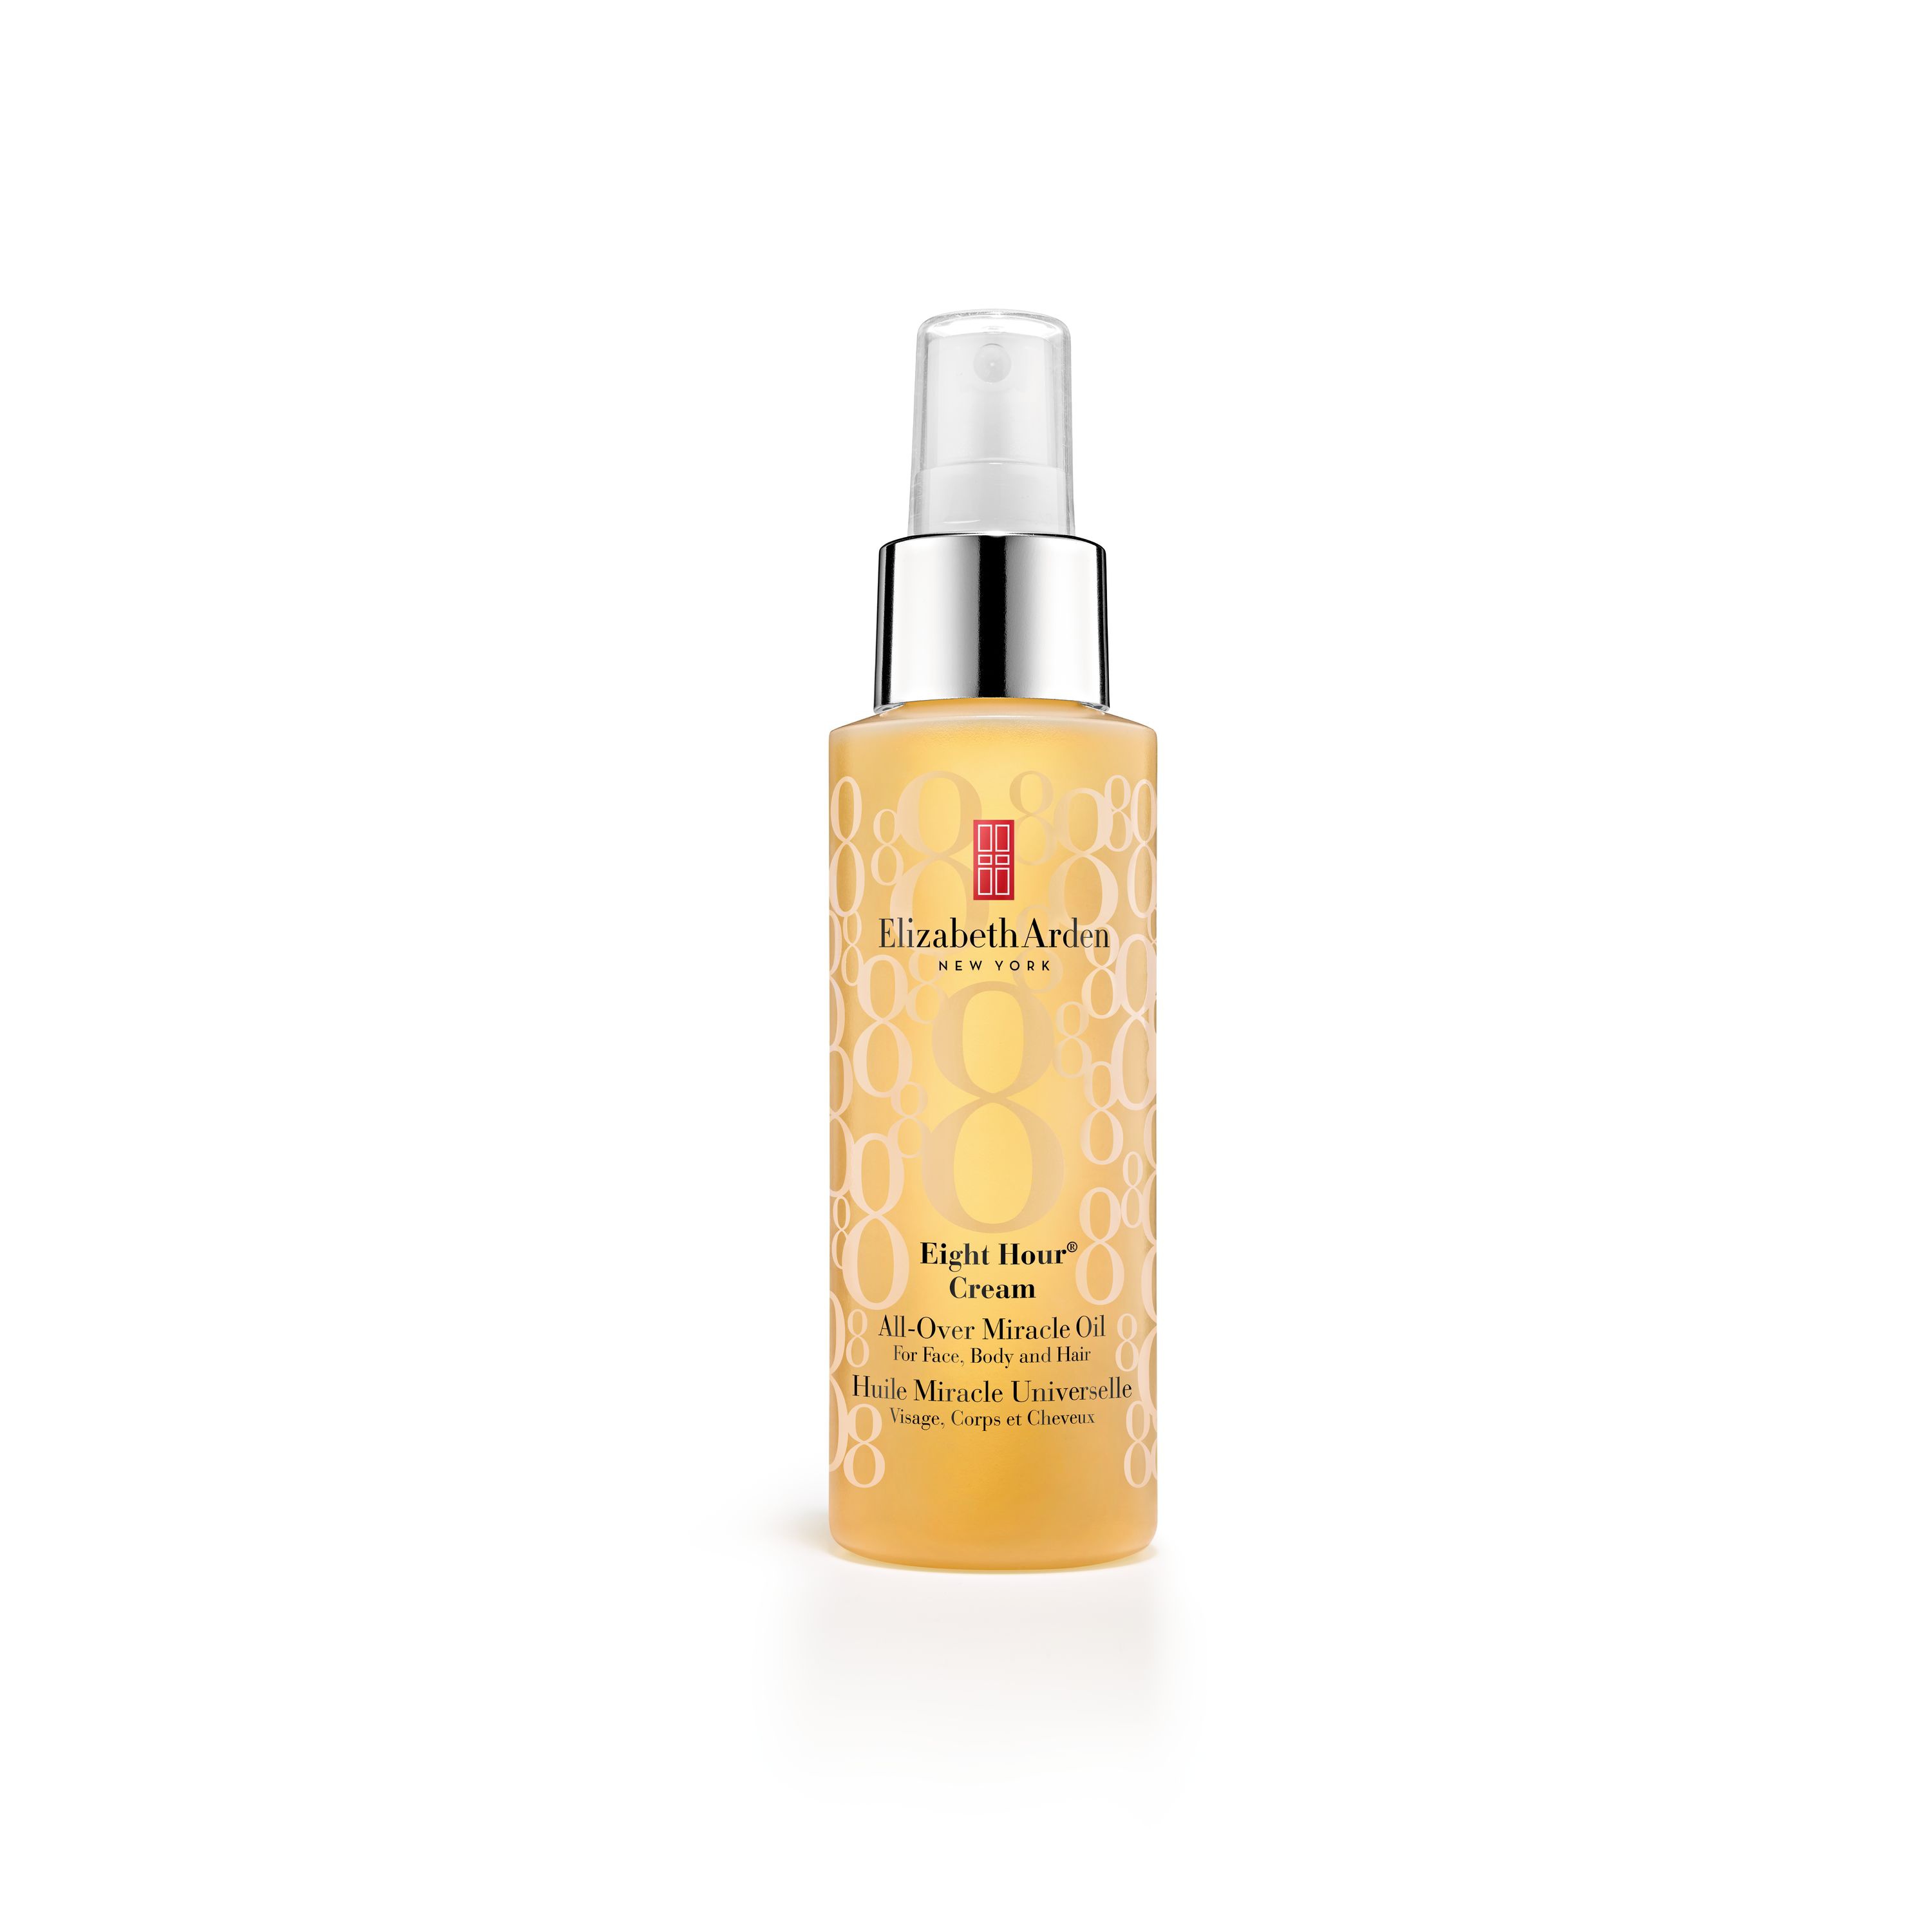  Eight Hour Cream All-Over Miracle Oil